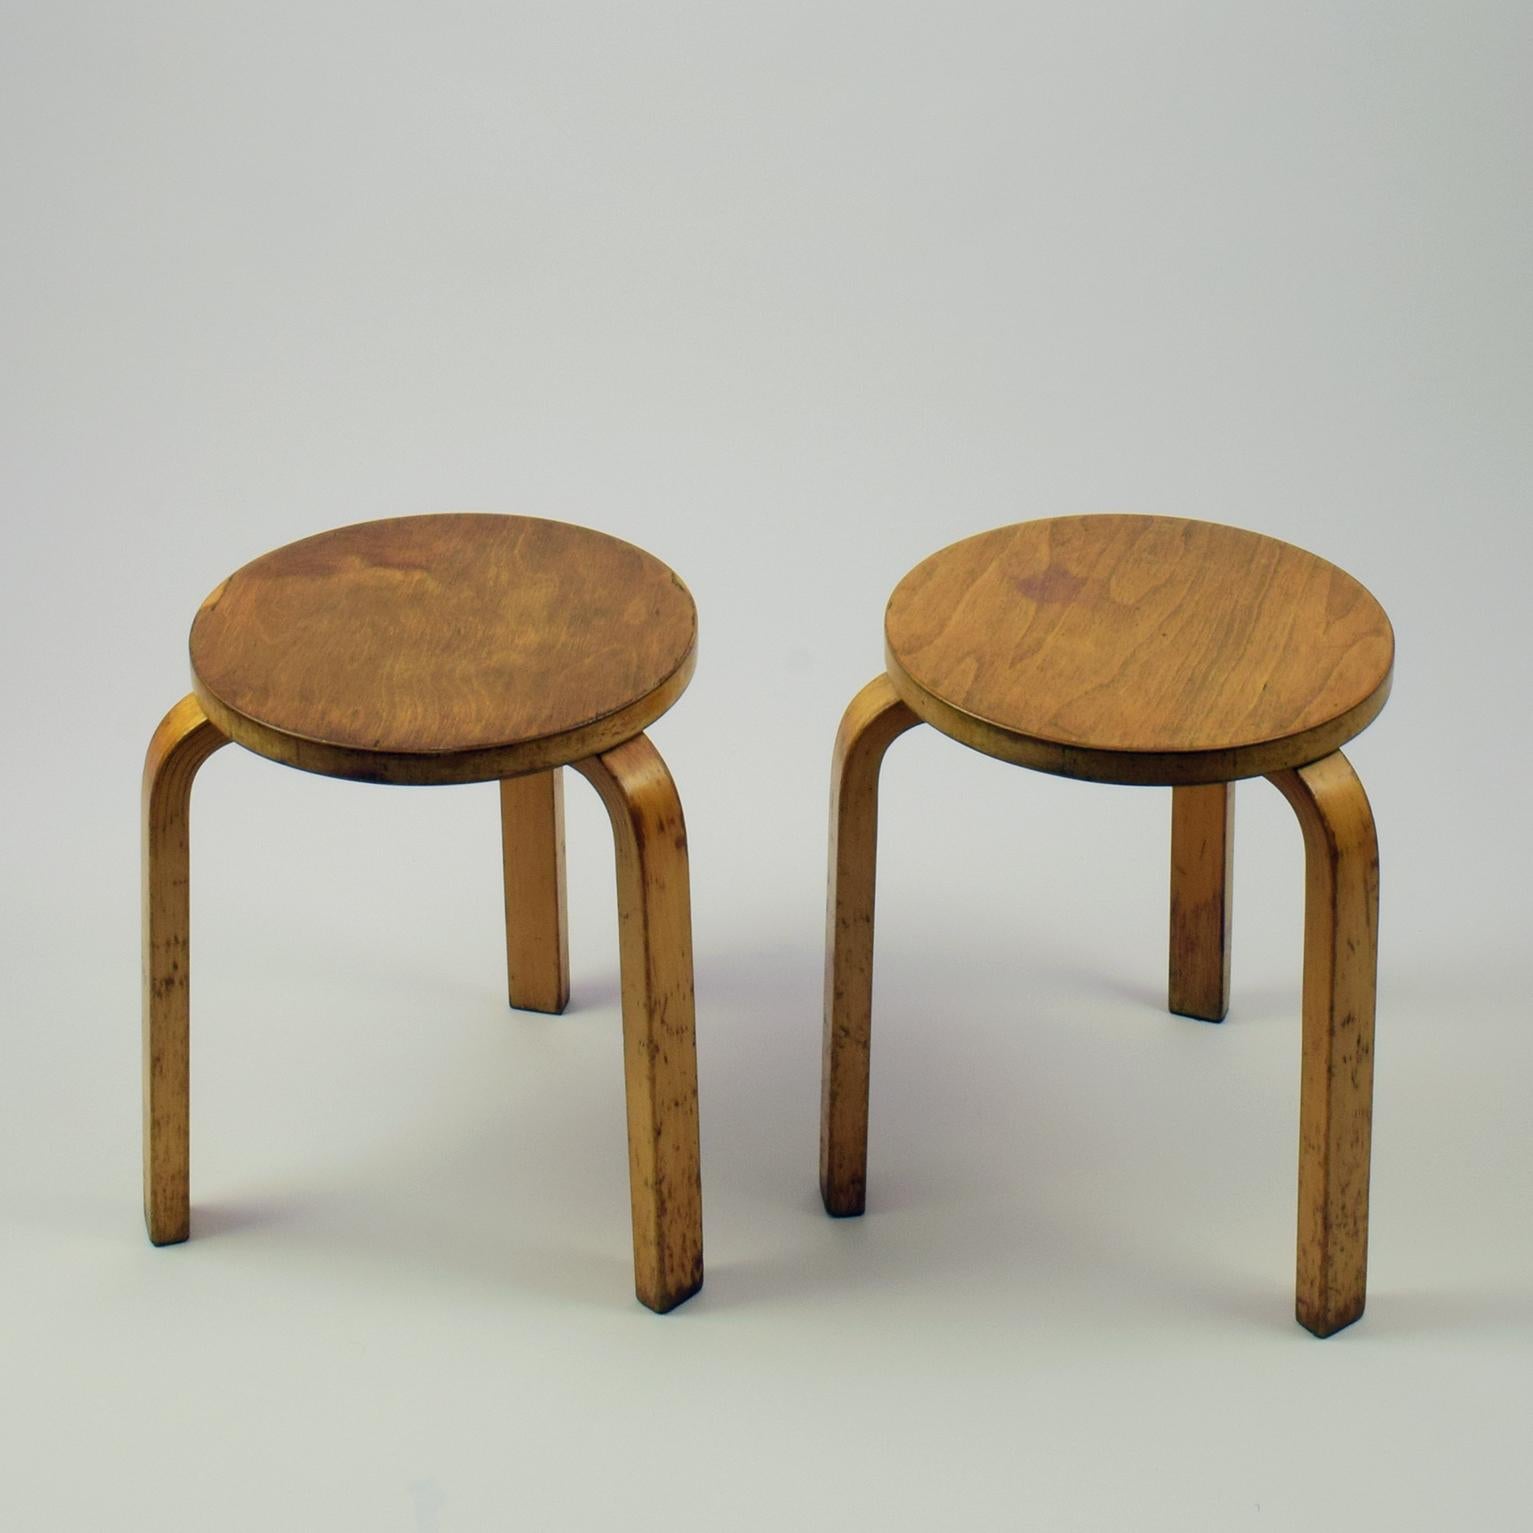 Alvar Aalto
Model 60 stool, designed 1933.
Birch and birch plywood.

These are pre-war or early Postwar production.
Un-restored condition with various marks. One stool has some ply missing from the top, and one stool has a patch of light